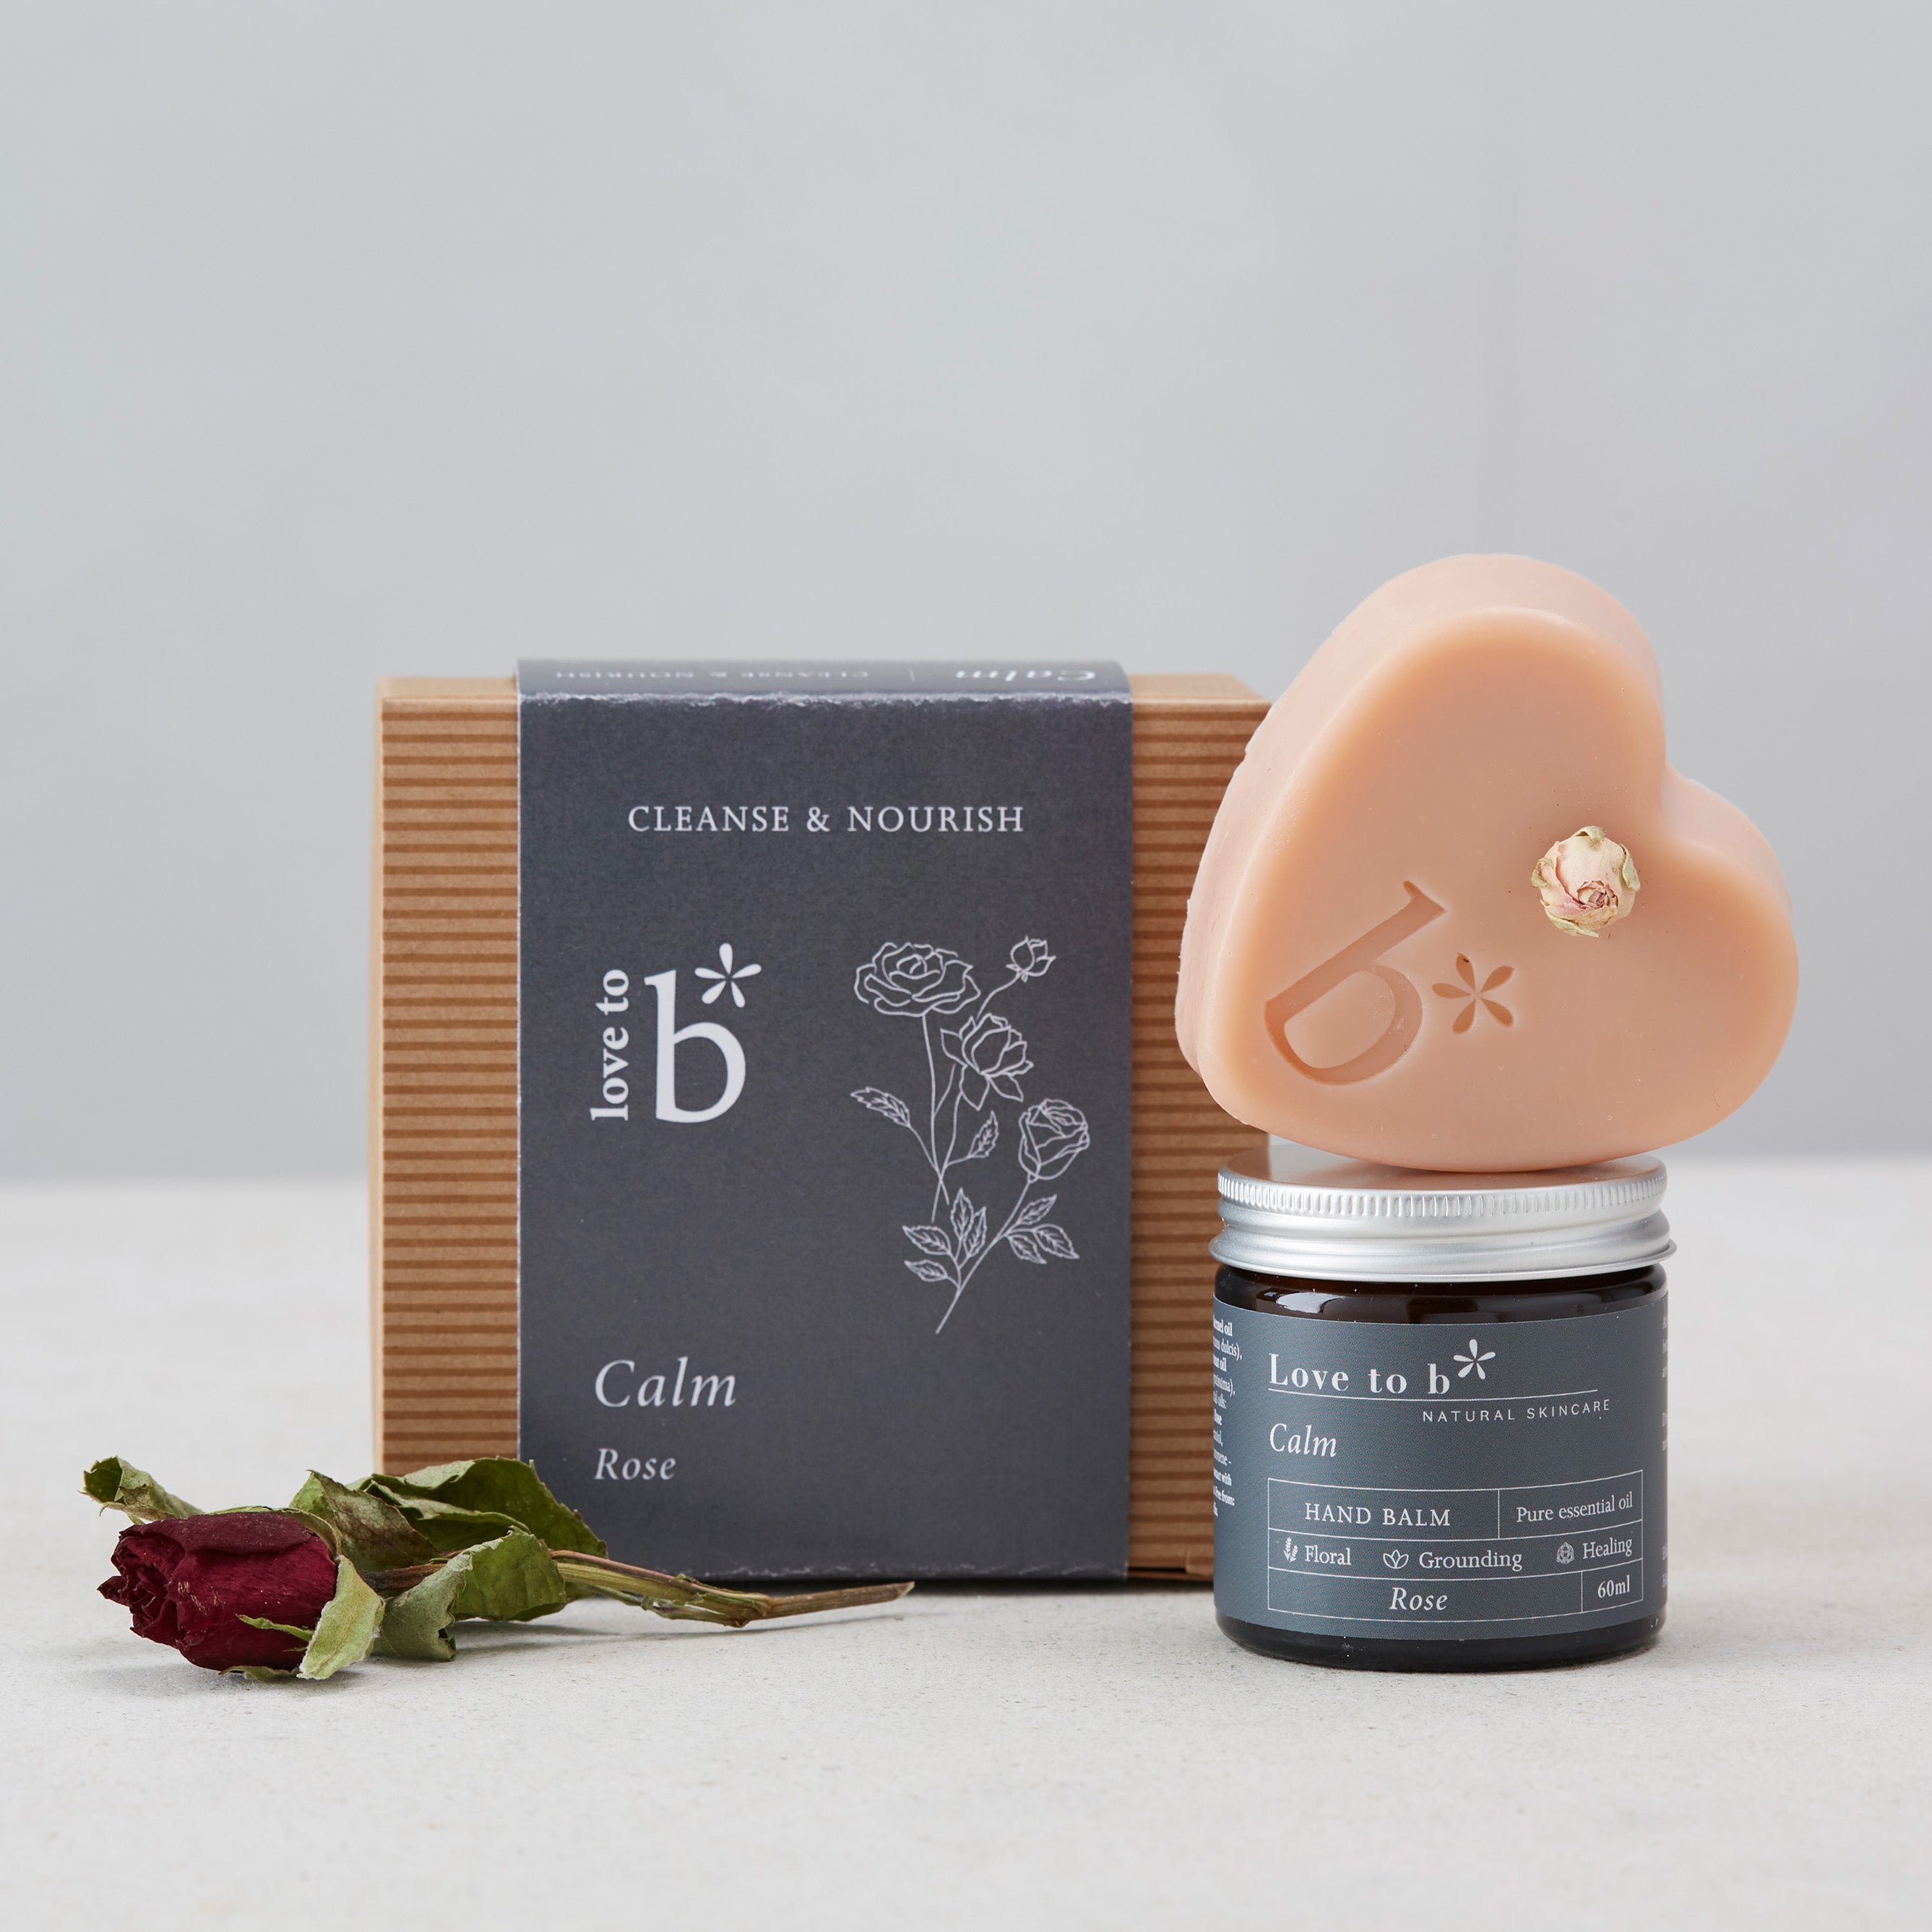 Love to b Natural Skincare Calming Rose Cleanse &amp; Nourish Gift Box with Calm Hand Balm &amp; Rose Heart Soap